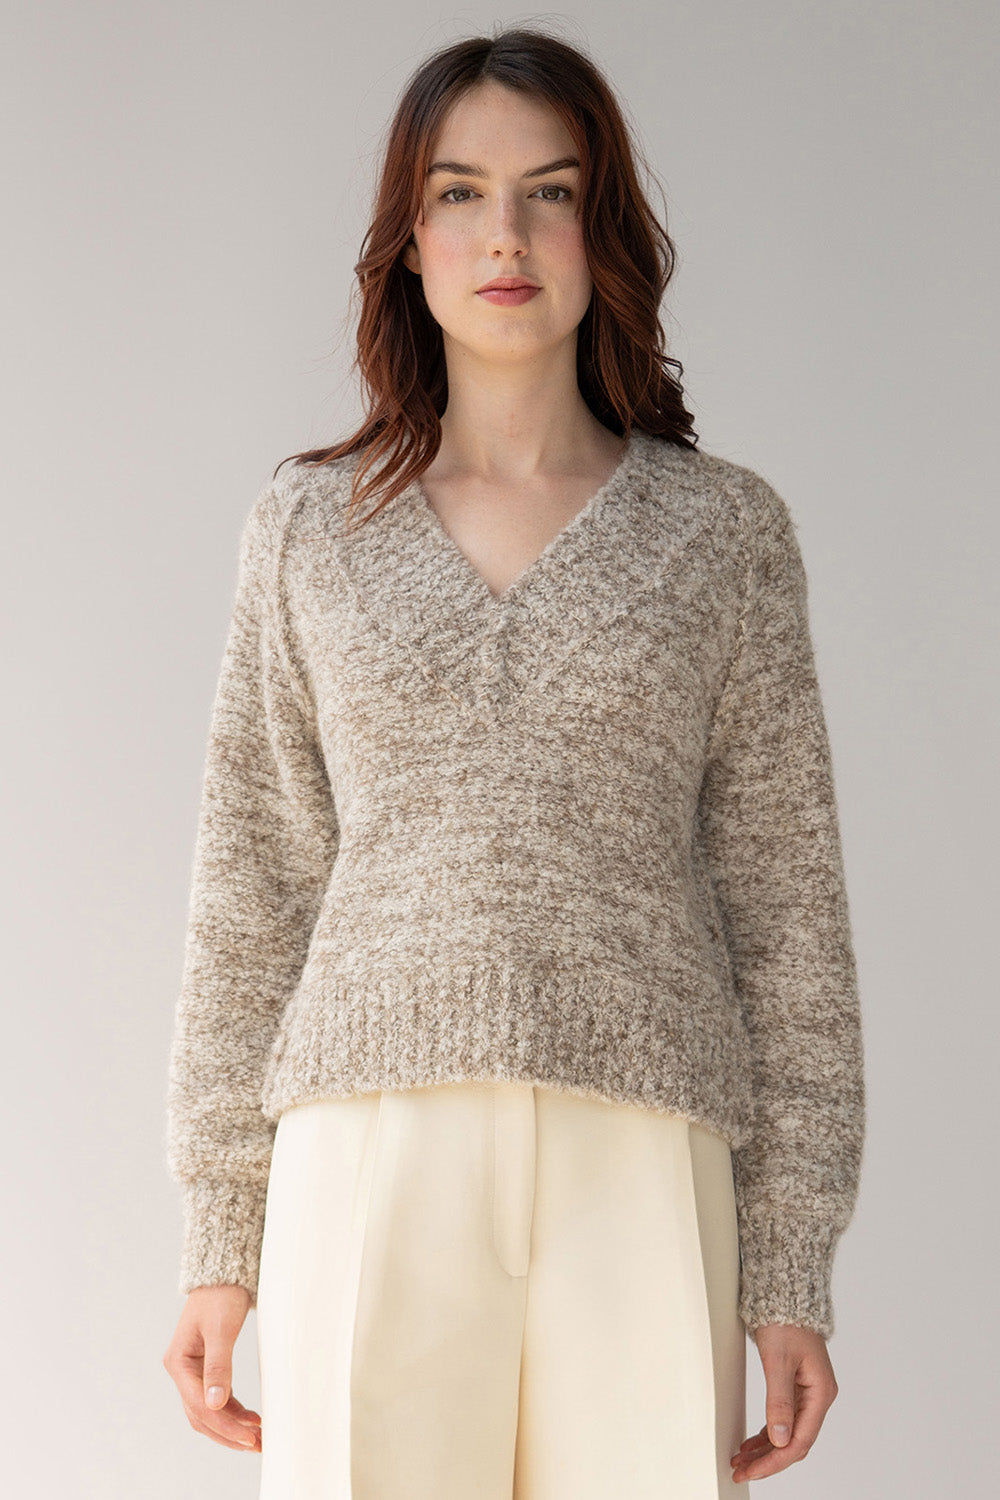 Oat ivory alpaca pullover features a low v in front knitted in soft texture boucle yarn